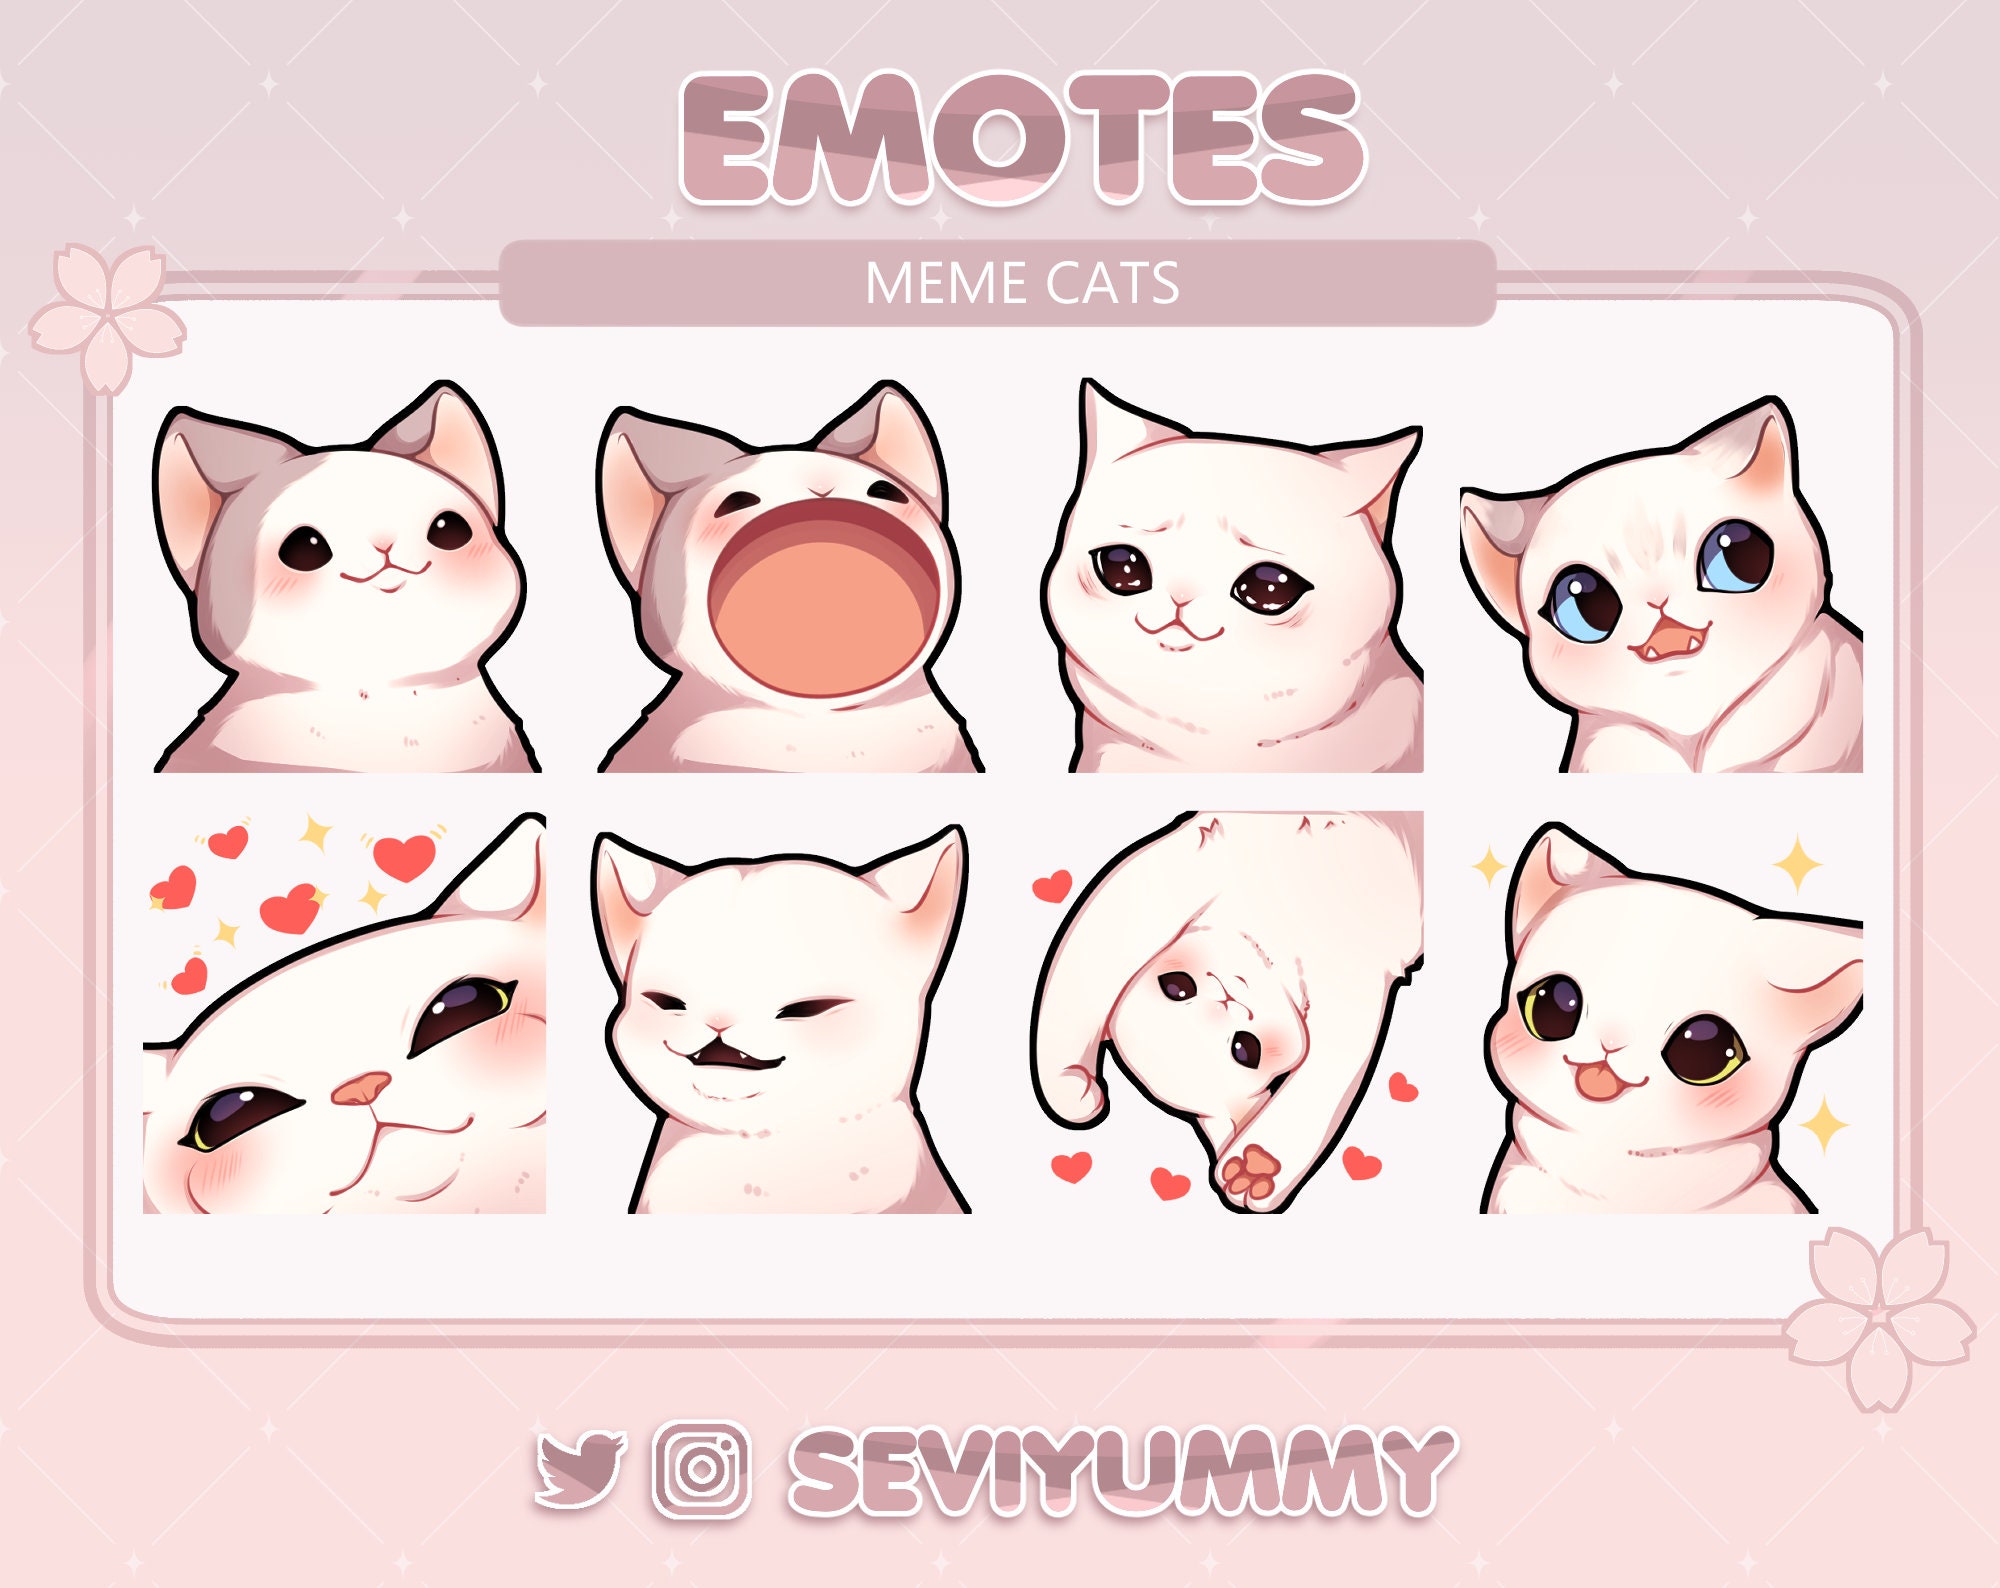 Discord And Youtube Emote Cat Meme Emotes For Streamers Kawaii Cute ...